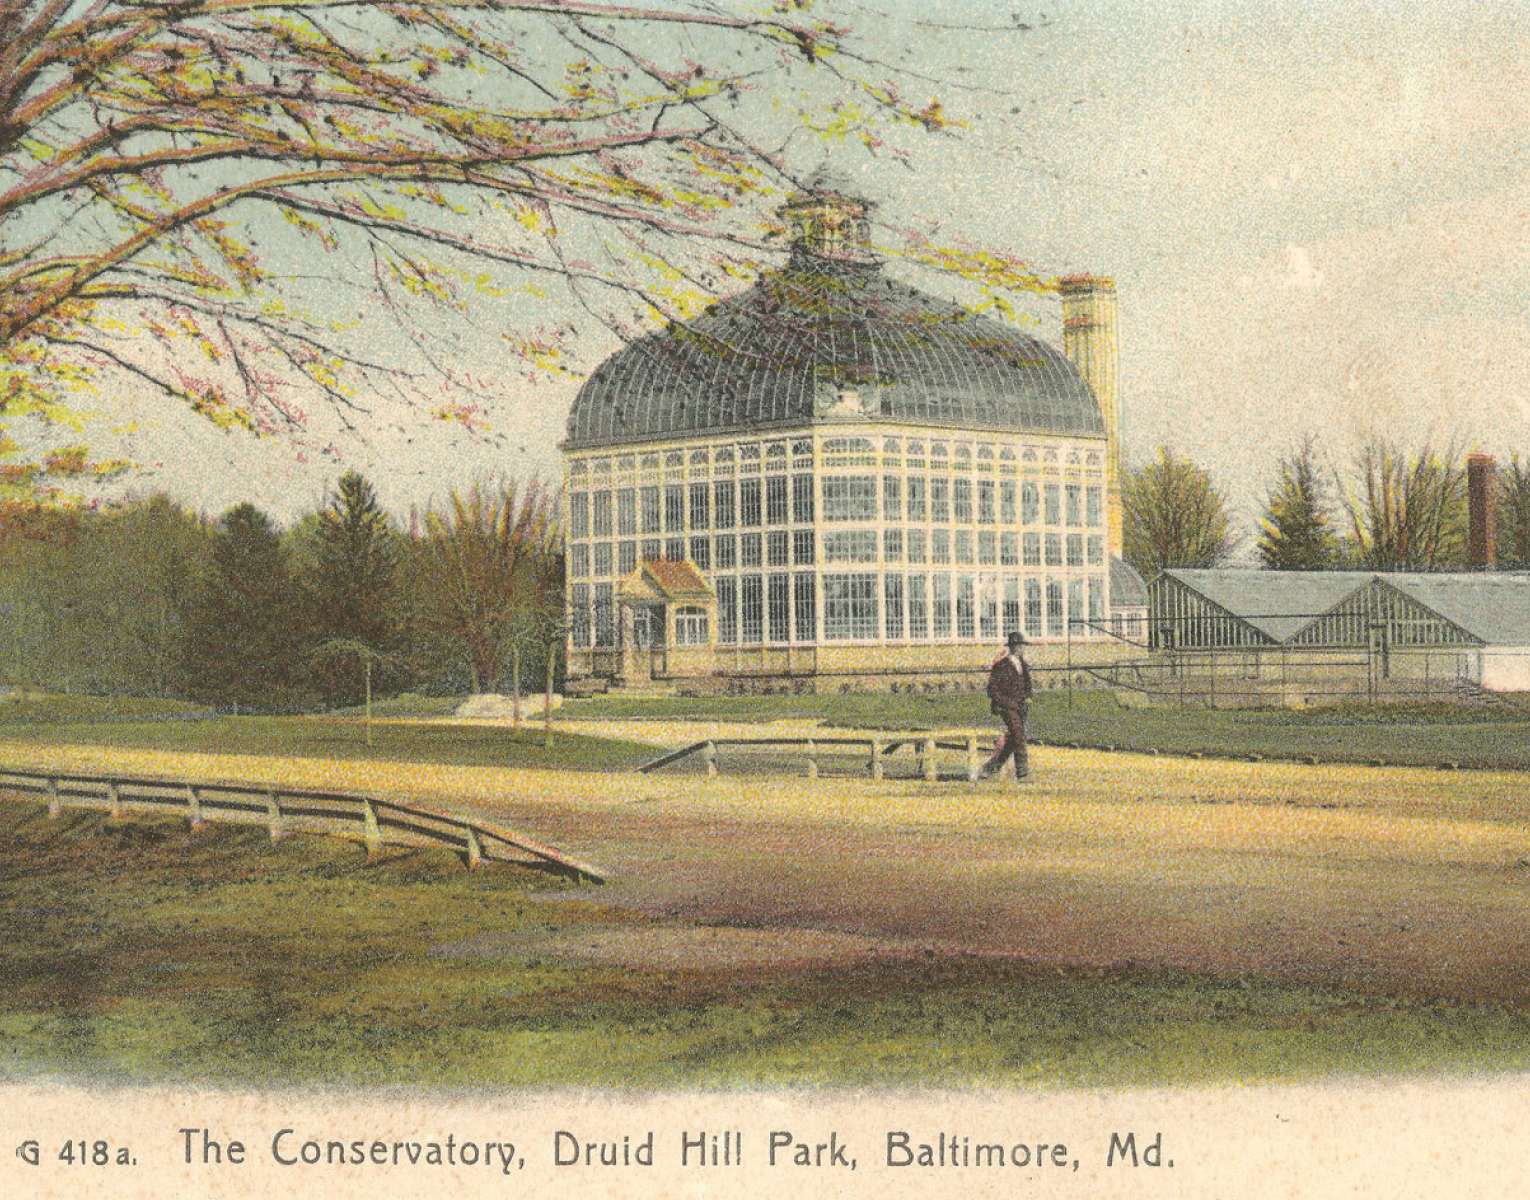 A man in a suit walking in front of the Conservatory on a vintage postcard